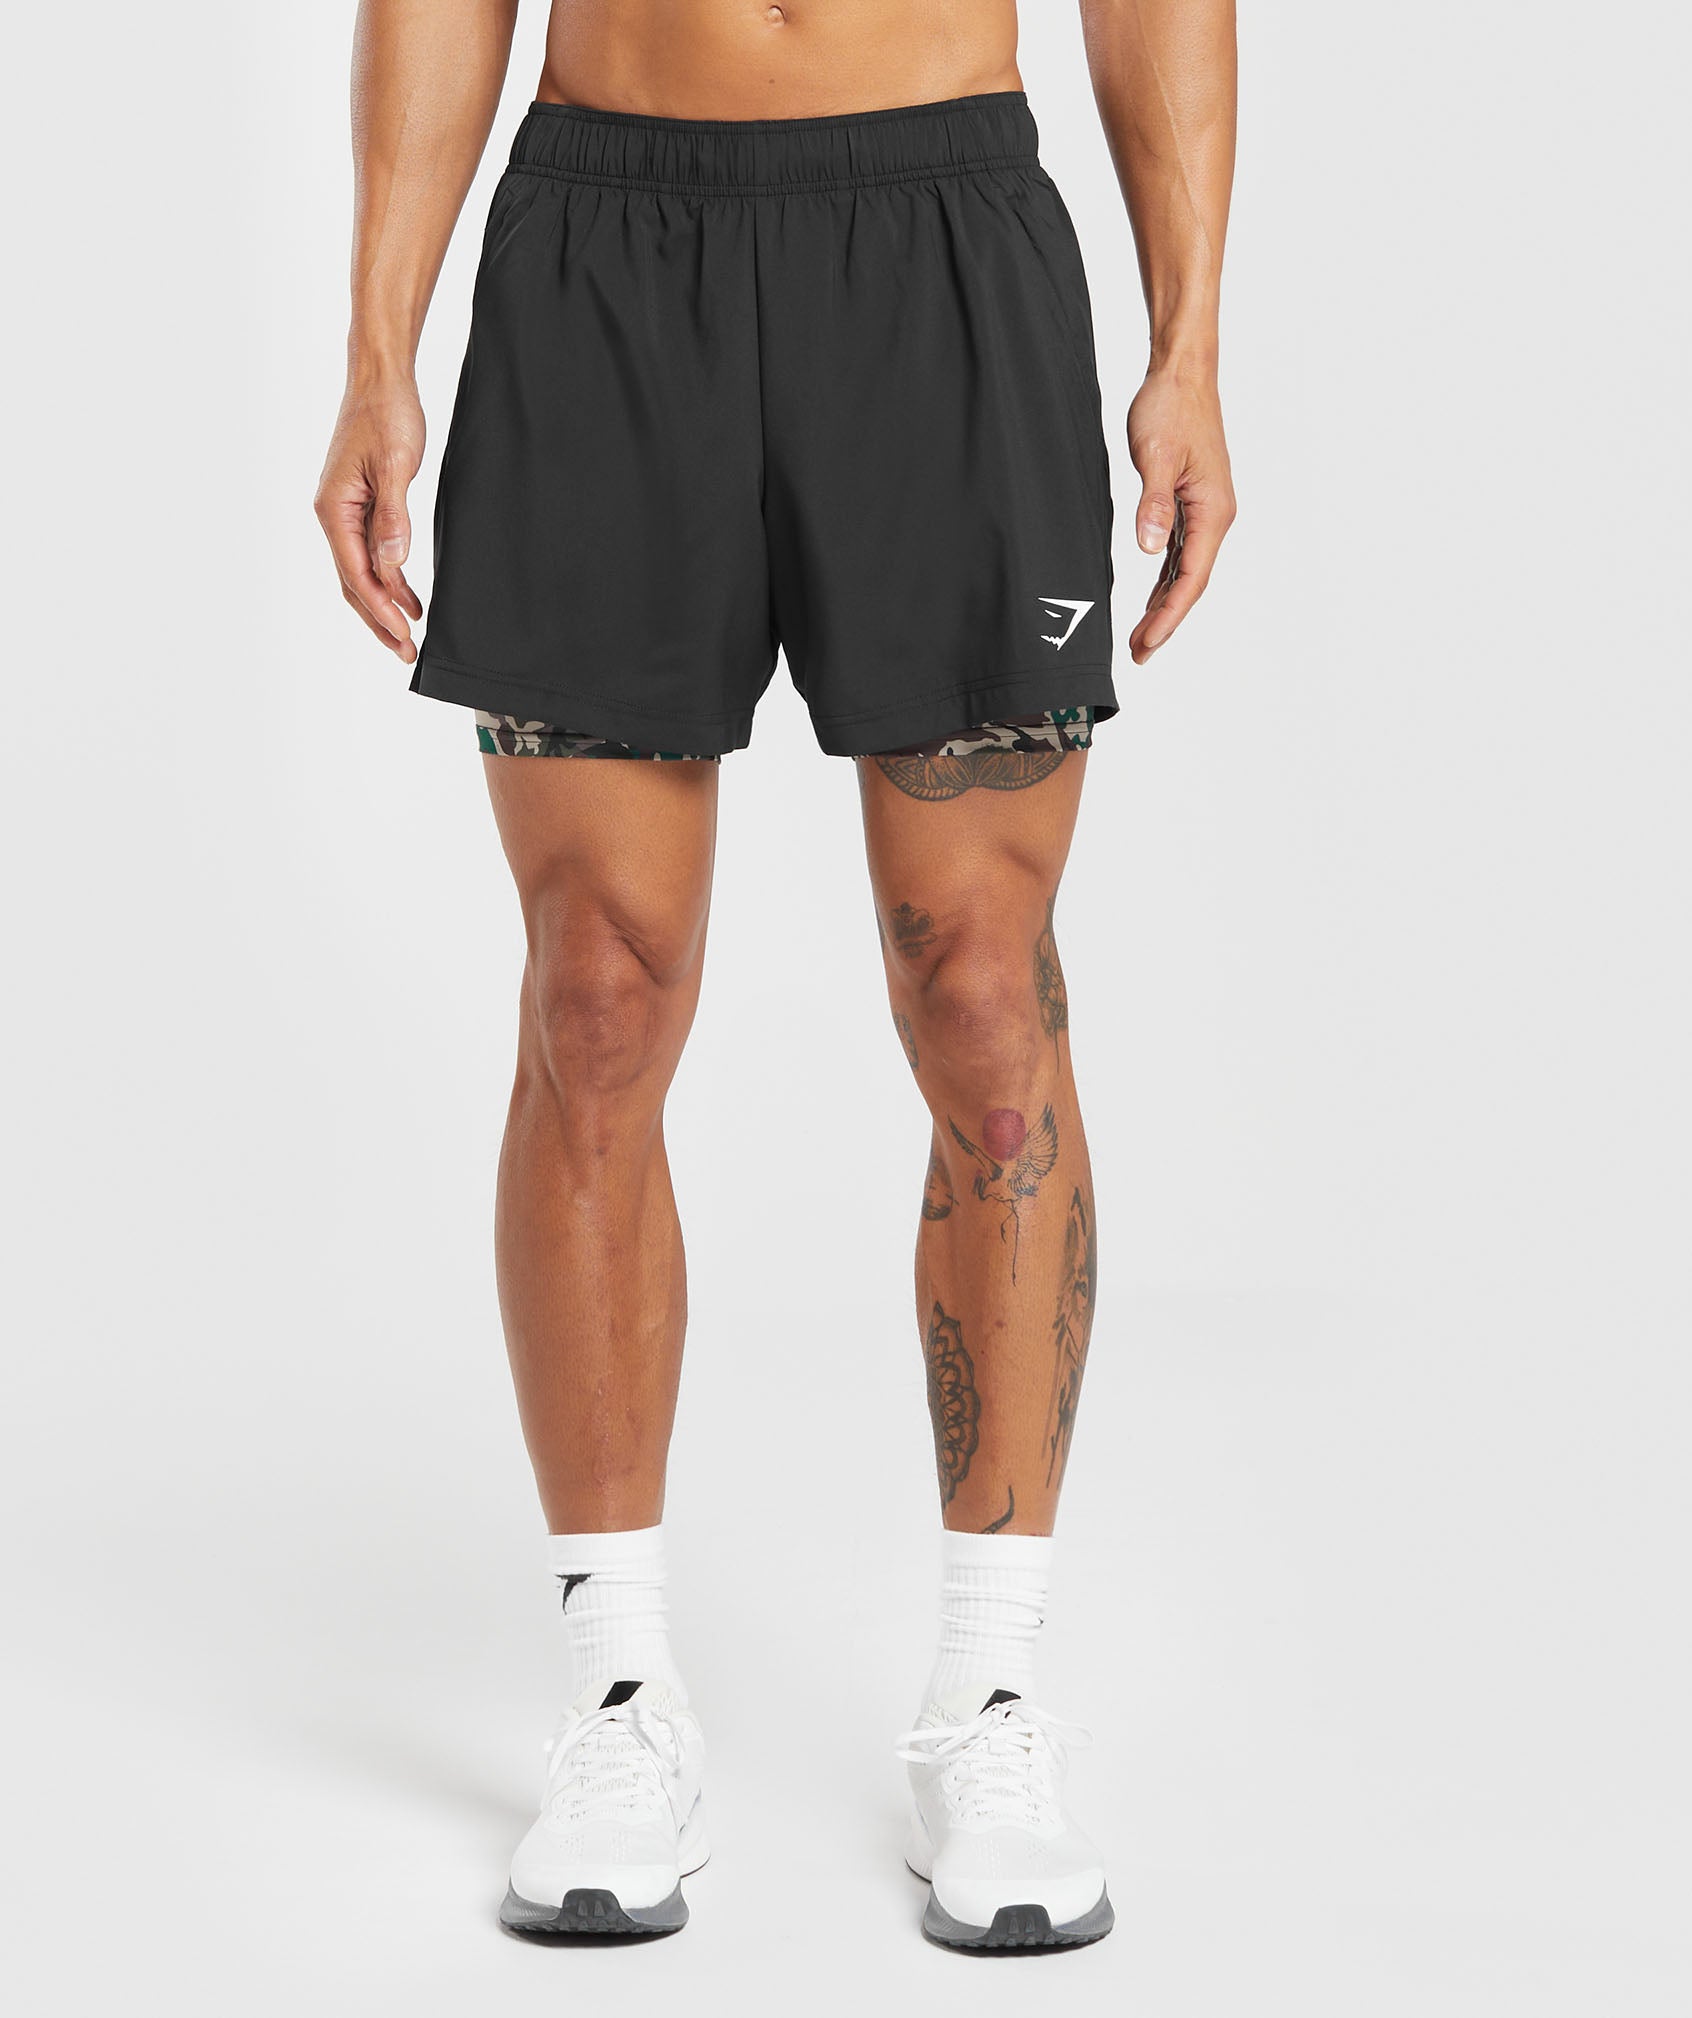 Sport 5" 2 In 1 Shorts in Black/Cement Brown